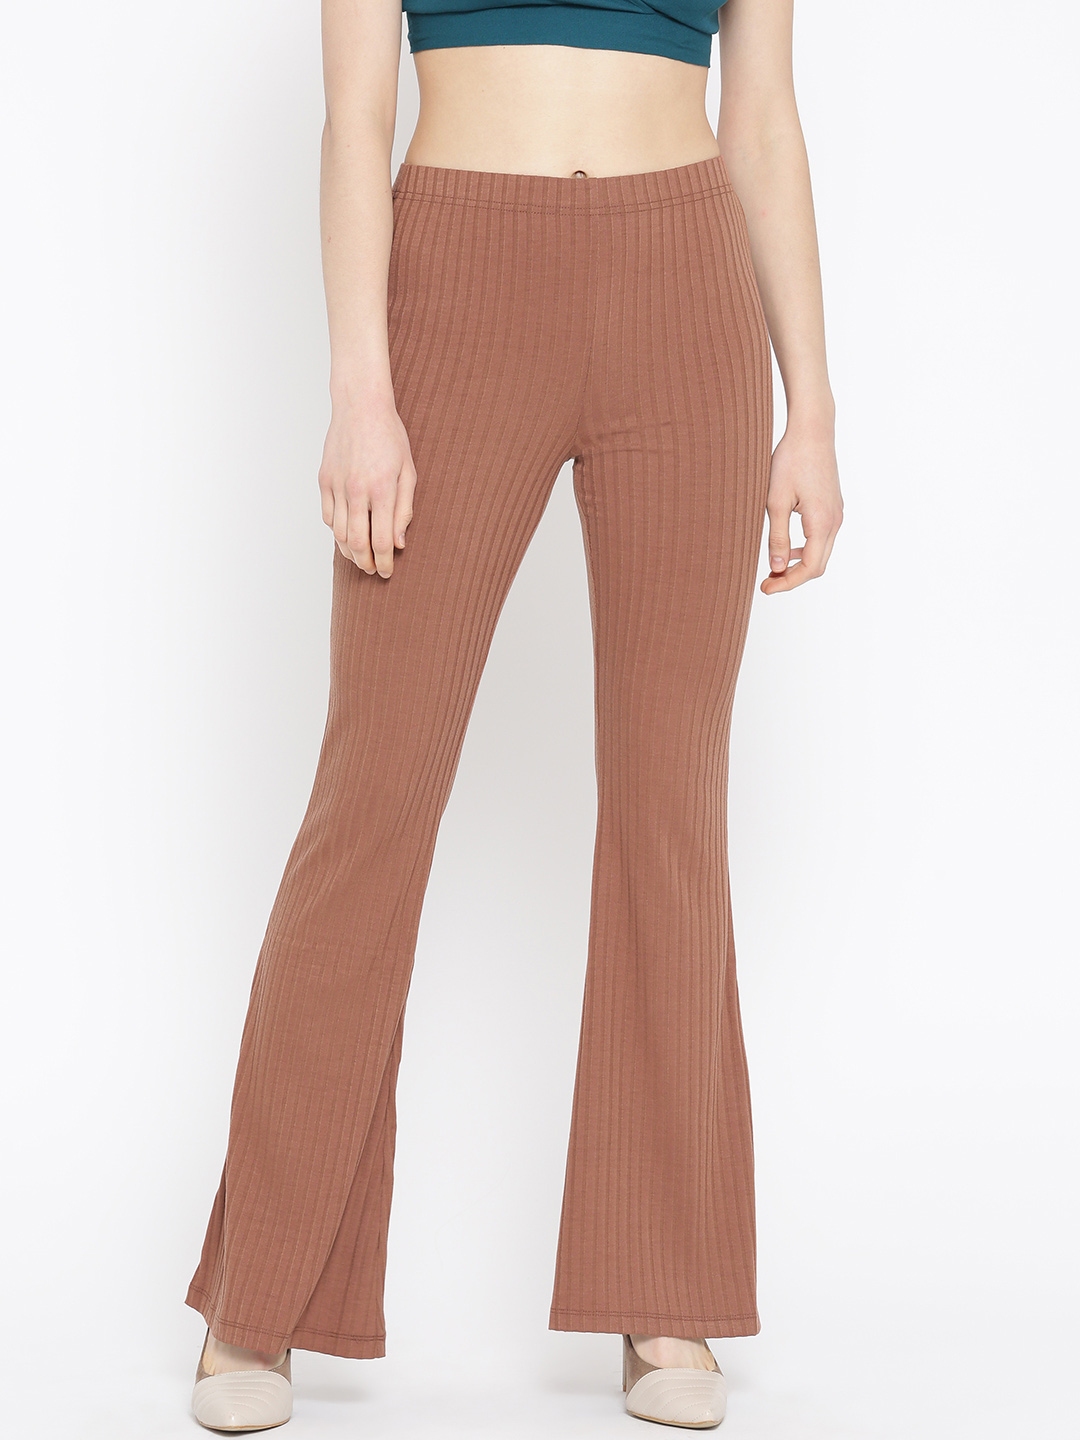 Forever 21 Womens HighRise Flare Pants in Maple Large  Connecticut Post  Mall